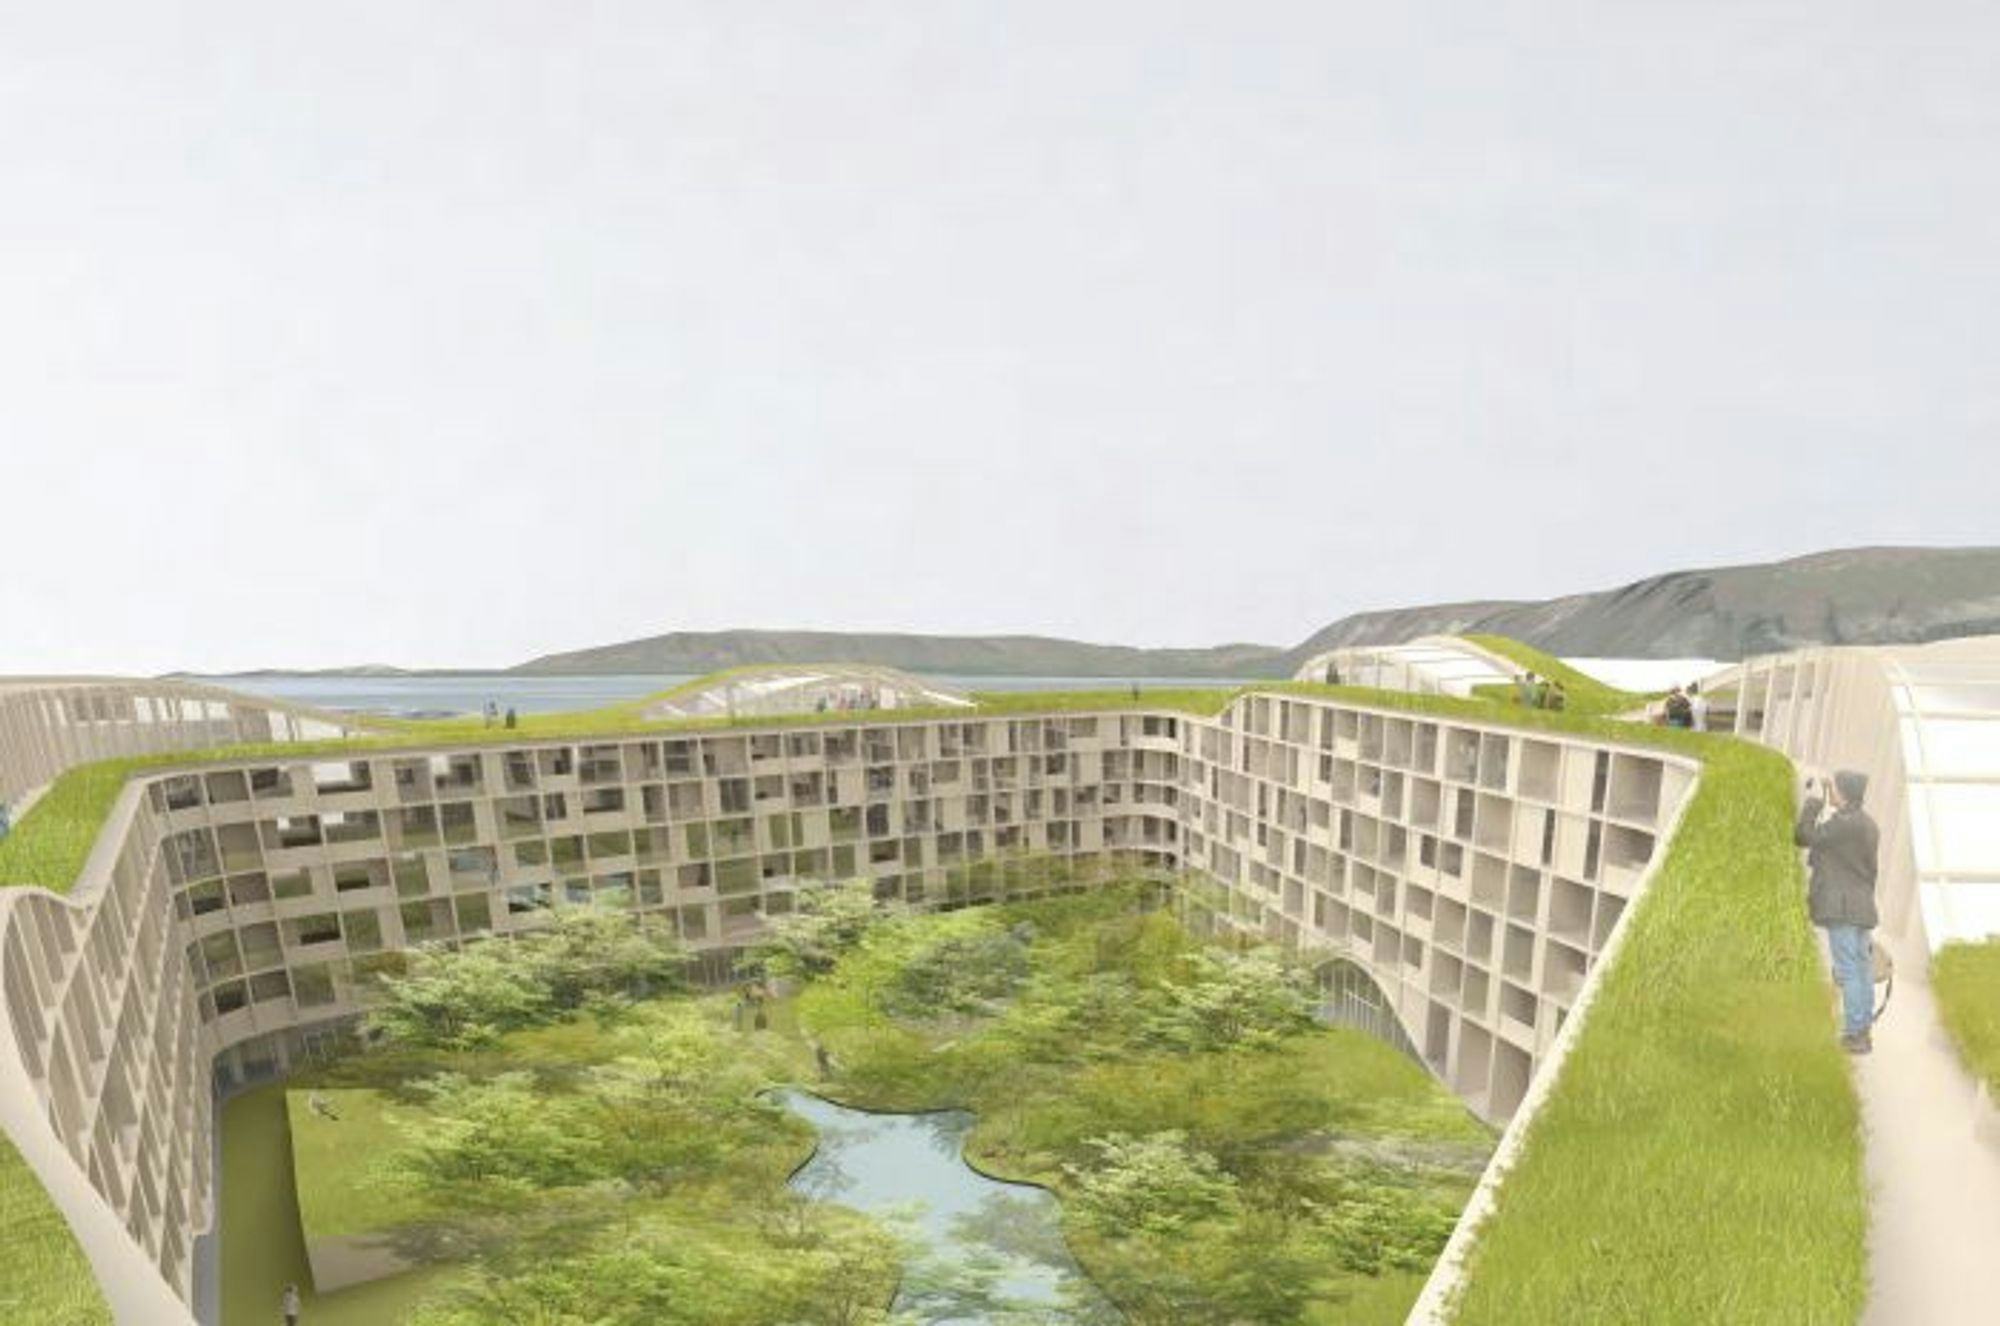 3D model of O-shaped building complex encompassing a central green courtyard with trees and small pond